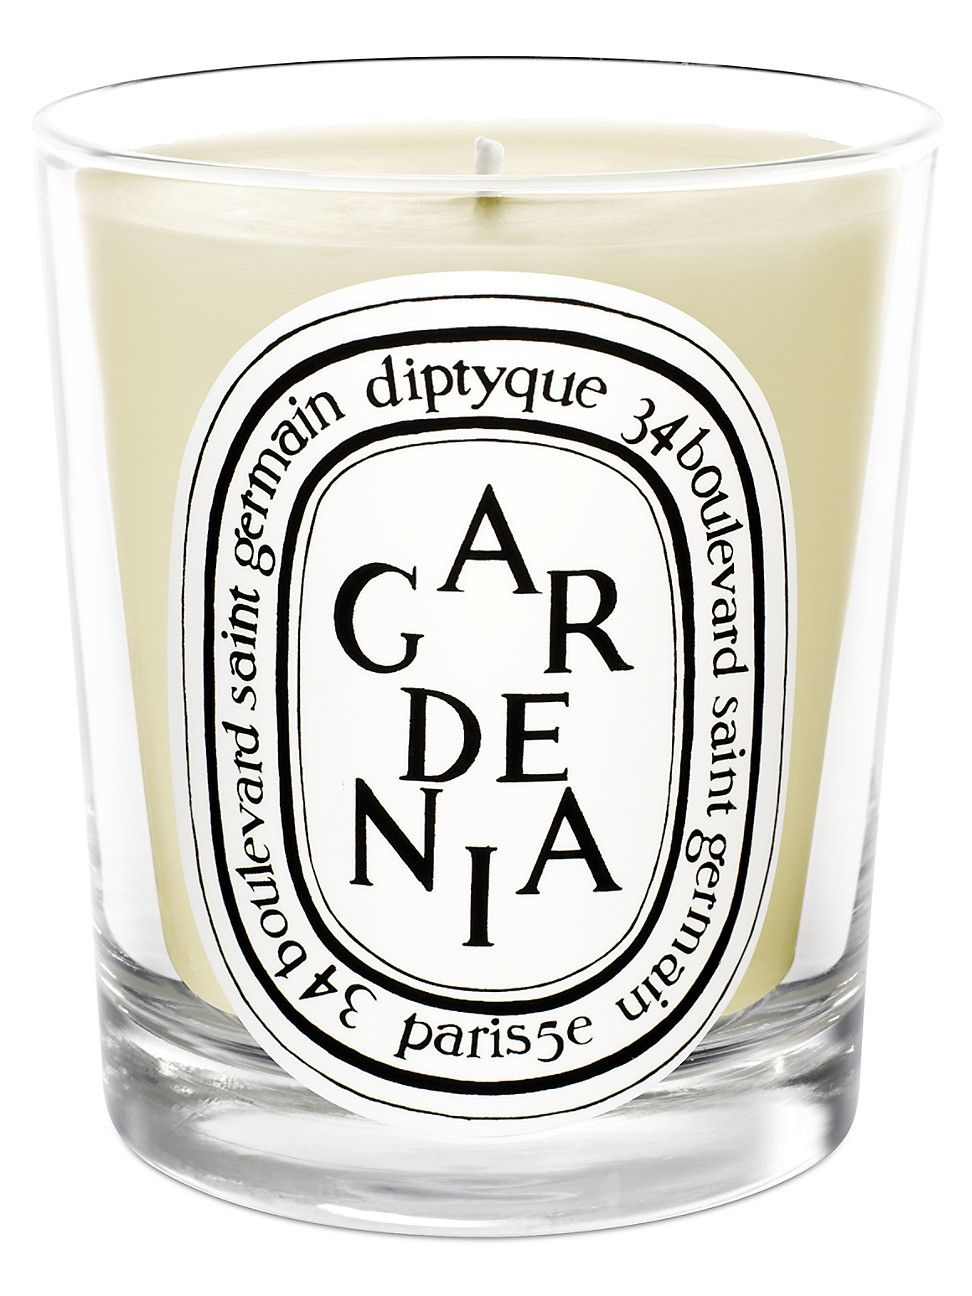 Diptyque Gardenia Flower Scented Candle | Saks Fifth Avenue